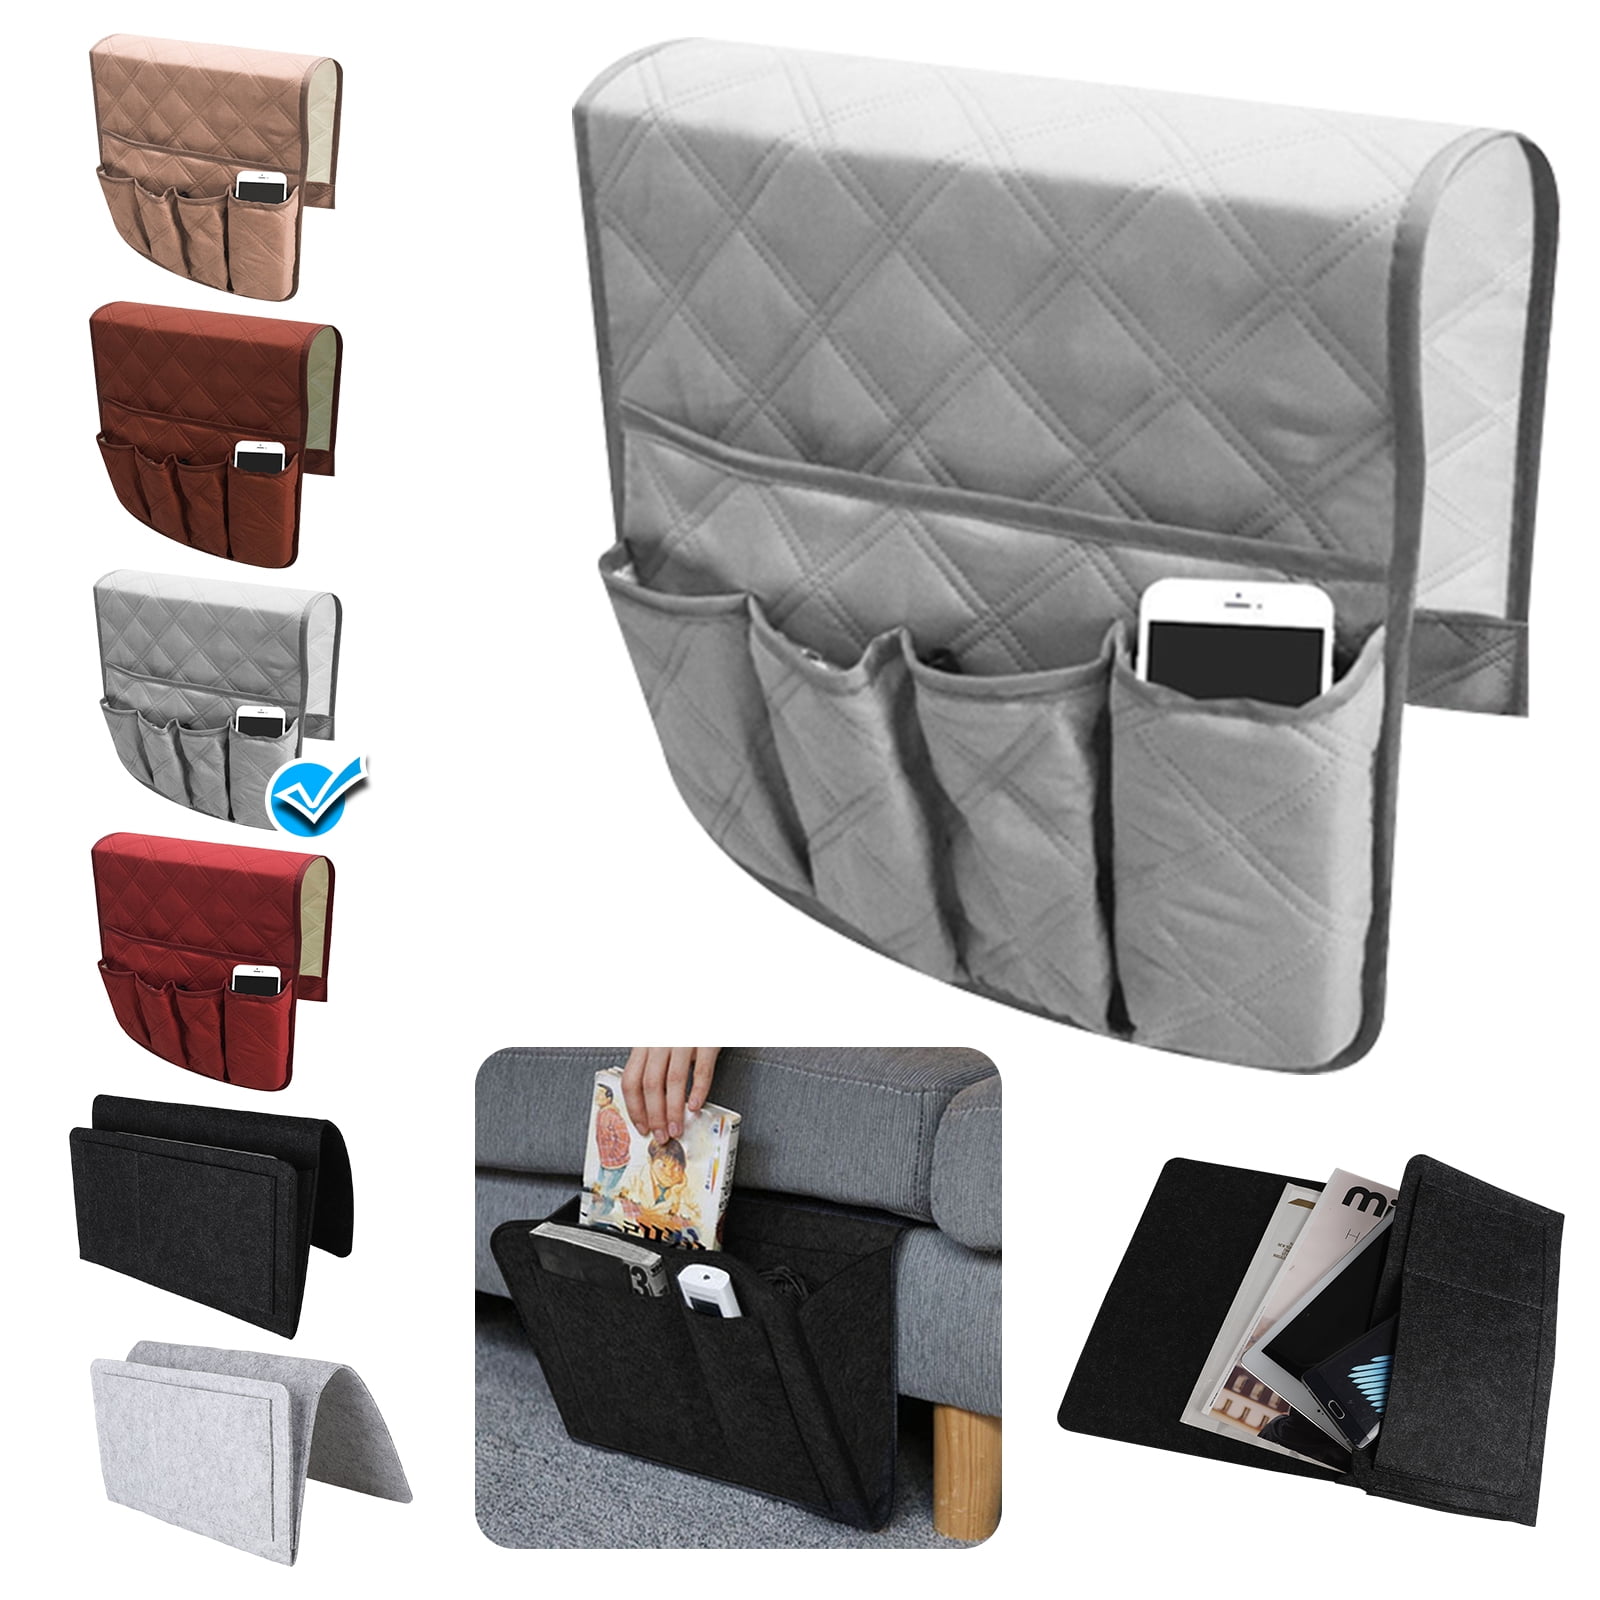 Details about   Sofa Arm Rest Organizer TV Remote Control Holder Chair Beside Couch Bag 7 Ports